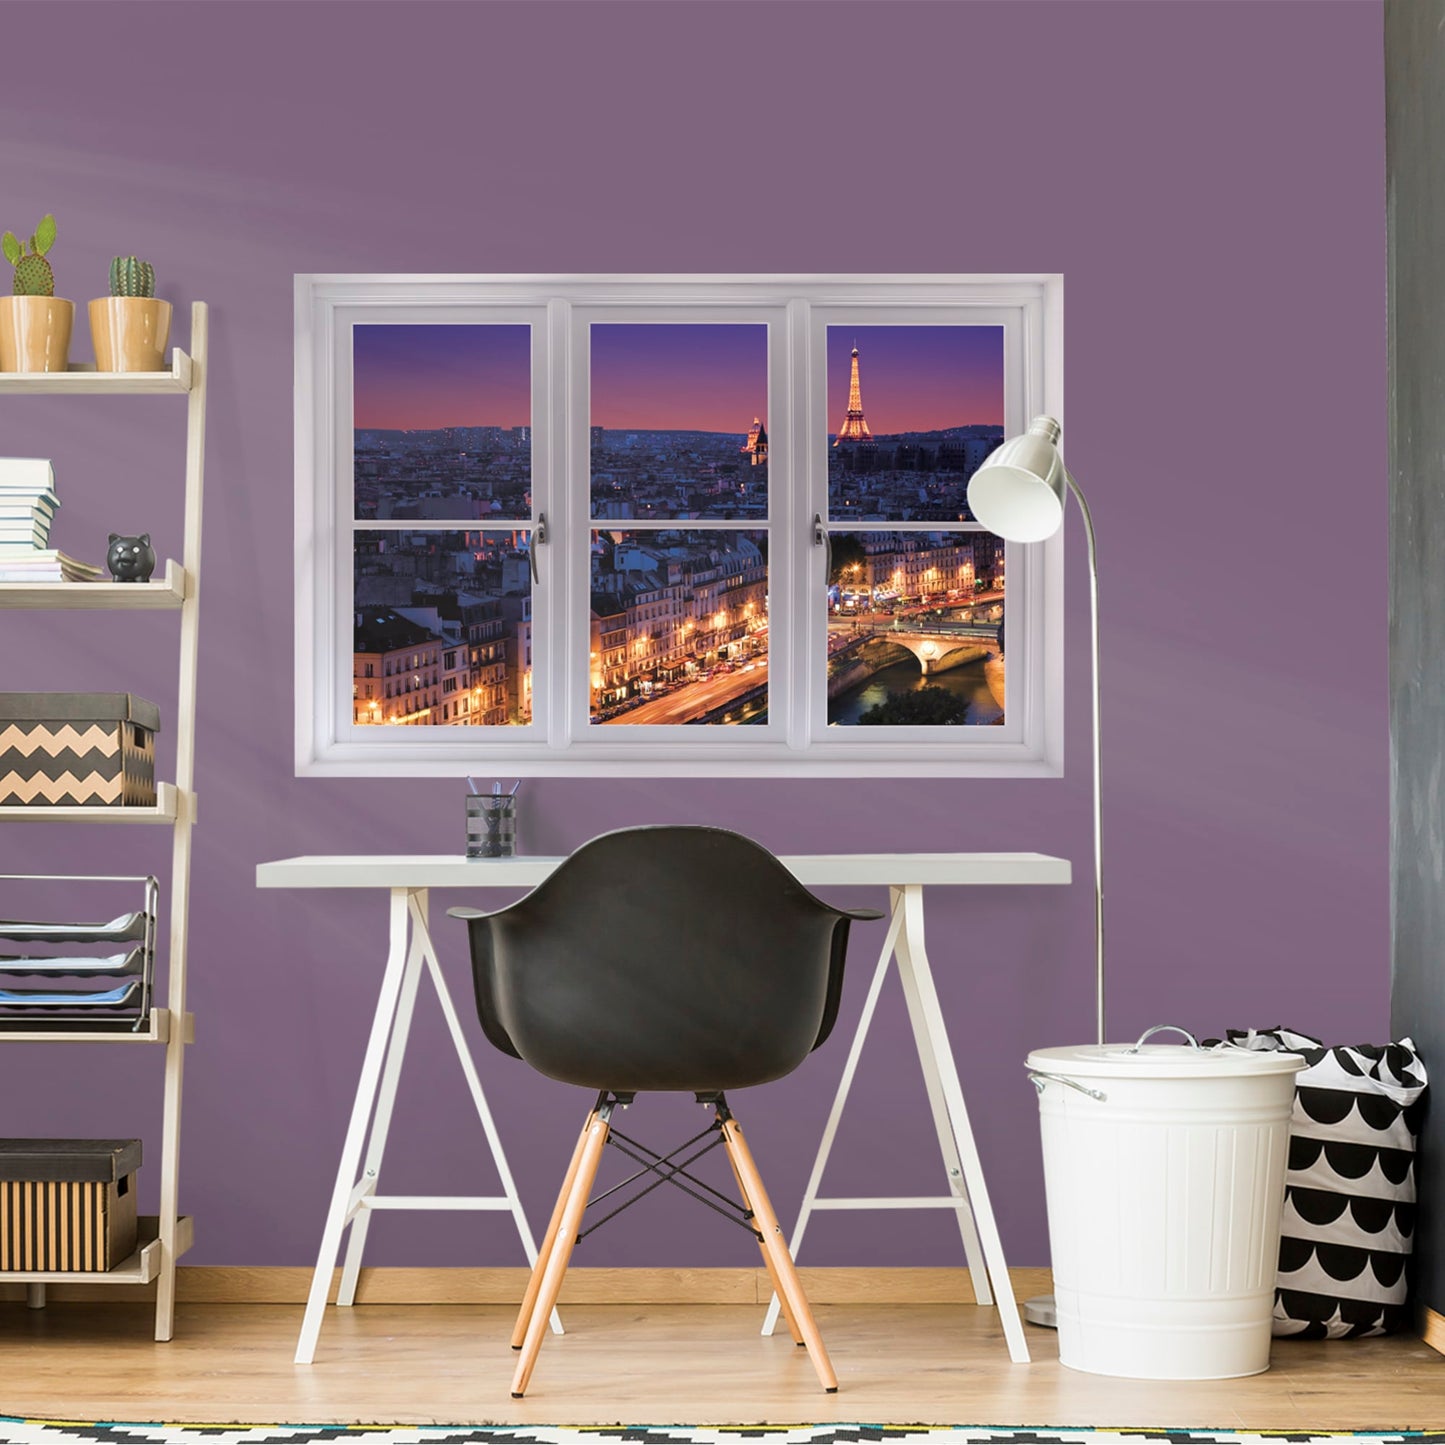 Instant Window: Paris Skyline at Night - Removable Wall Graphic